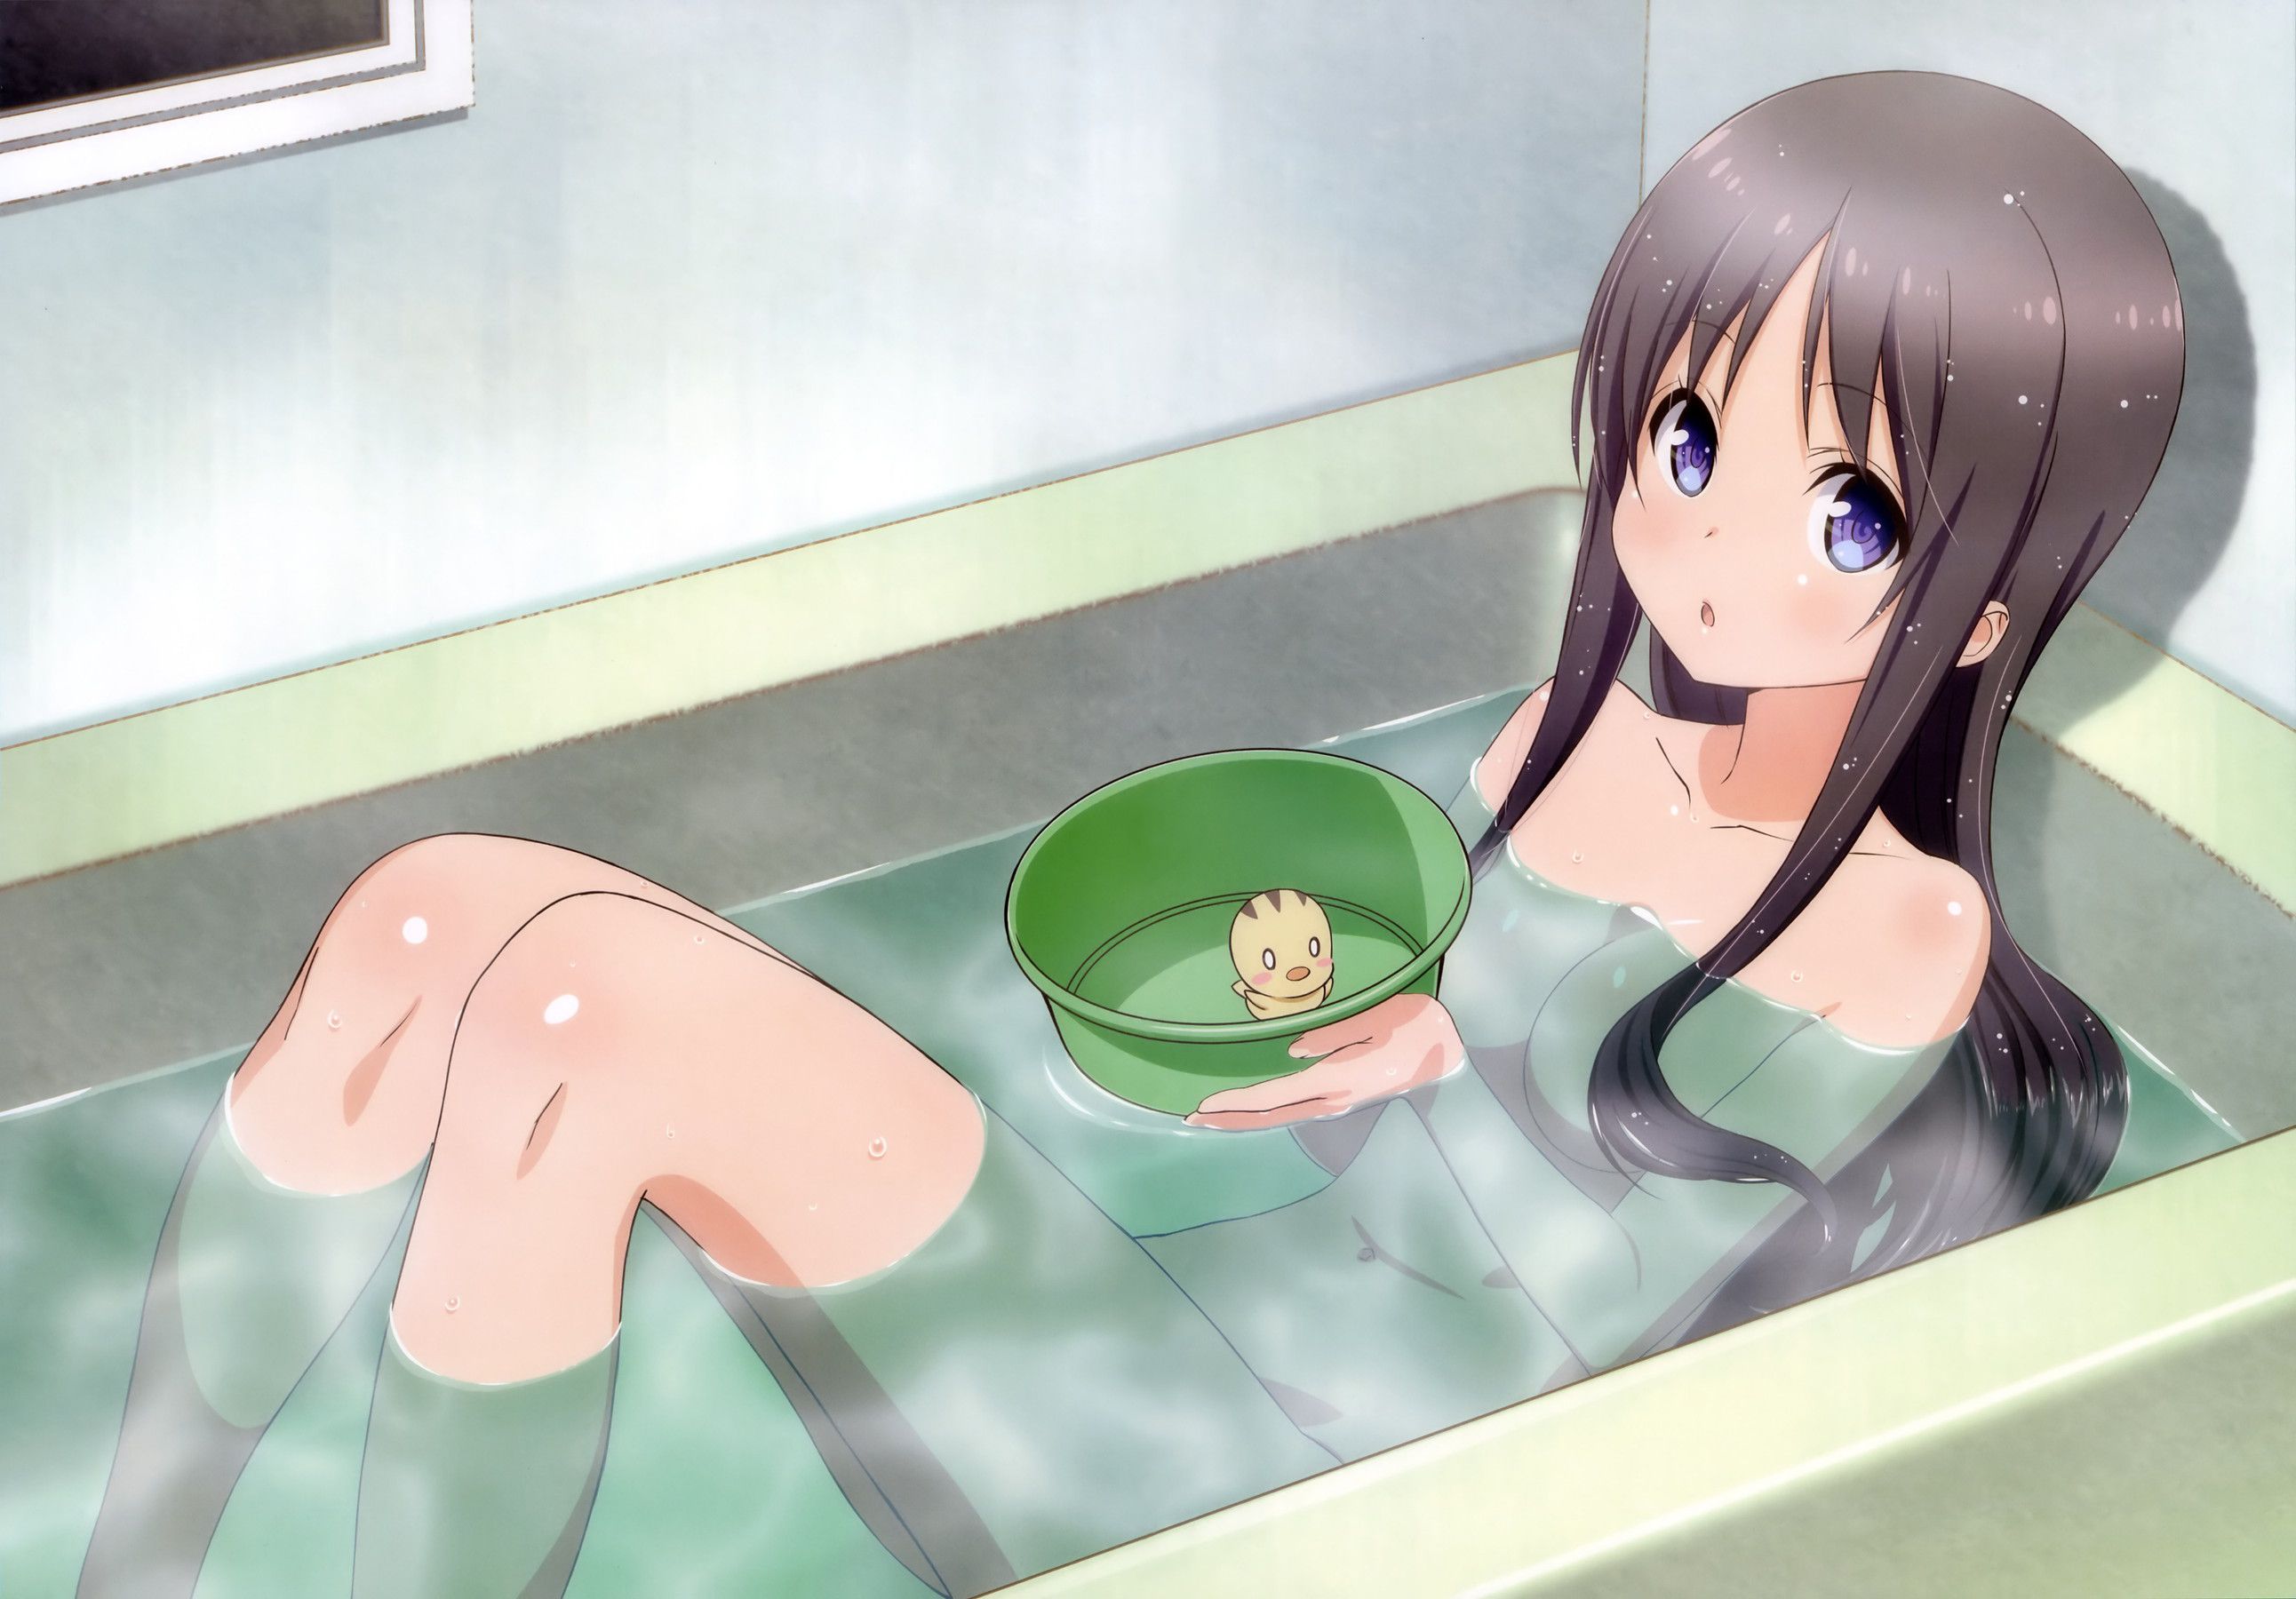 A erythro image of a girl in a bath 14